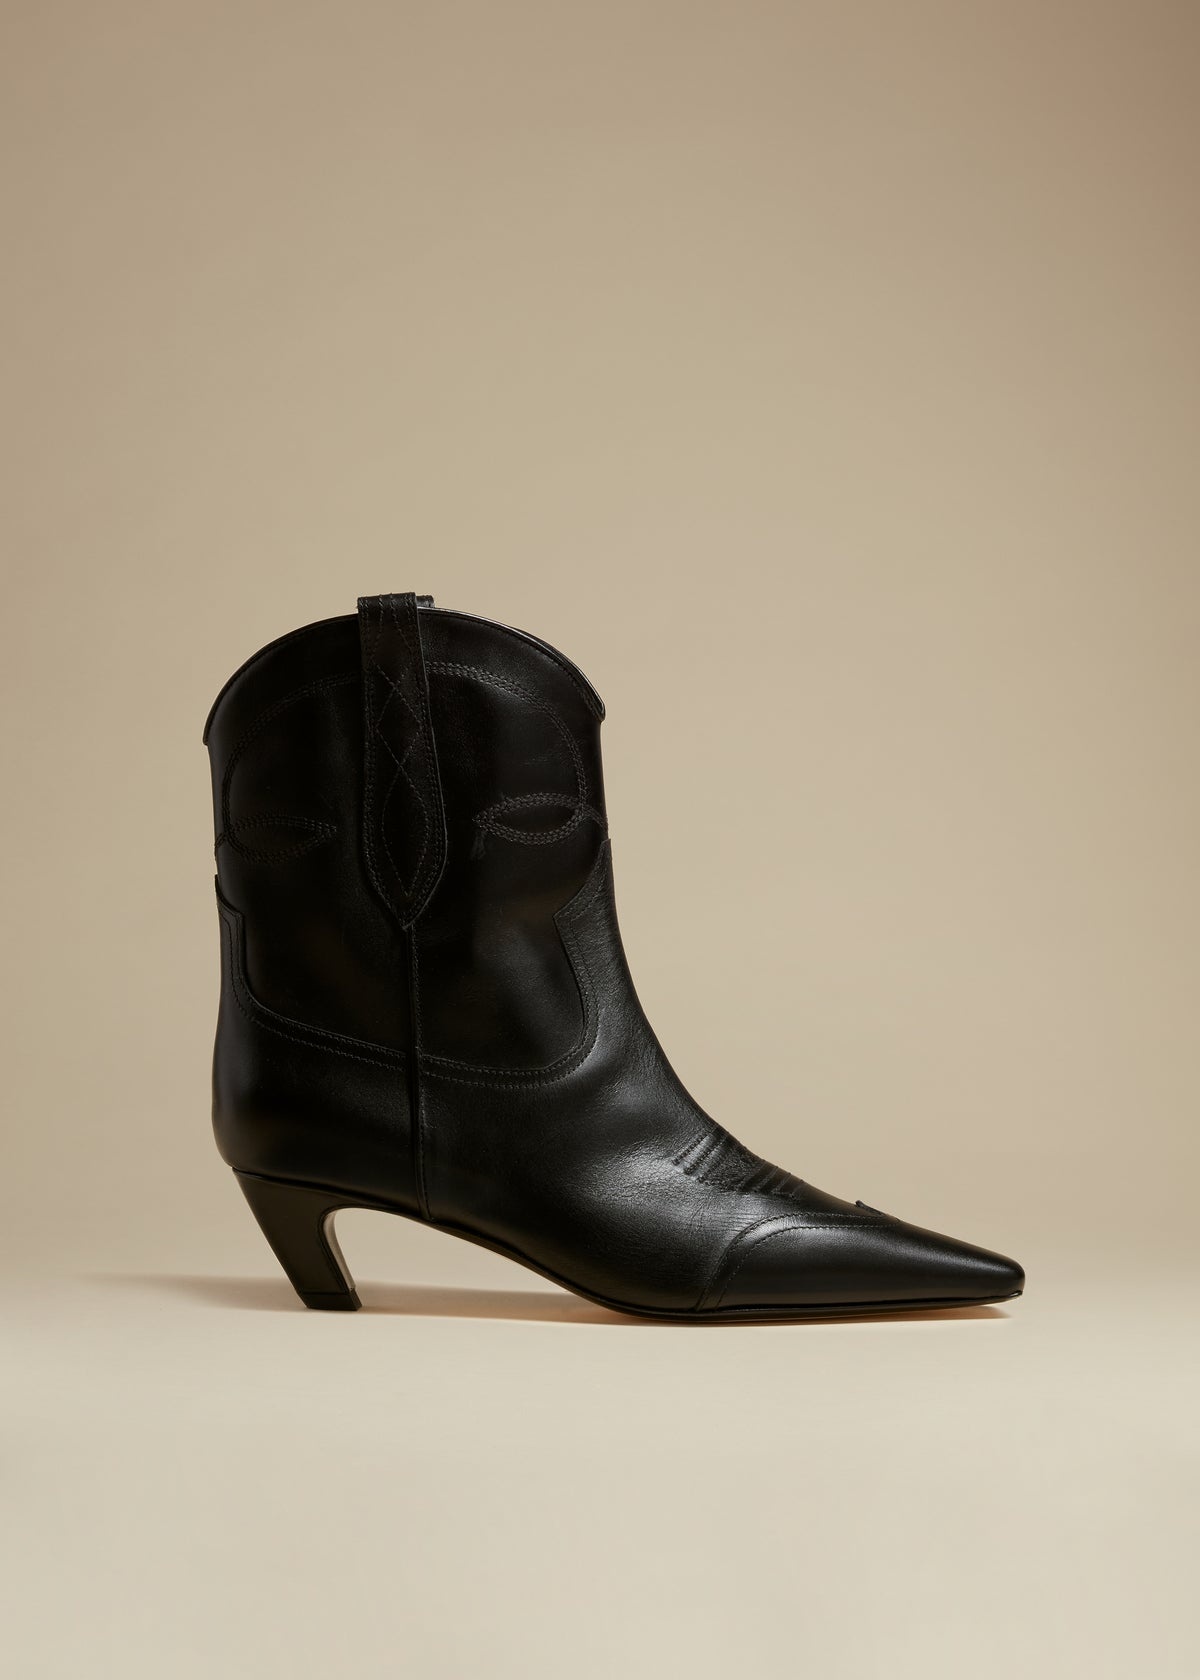 The Dallas Ankle Boot in Black Leather - 1